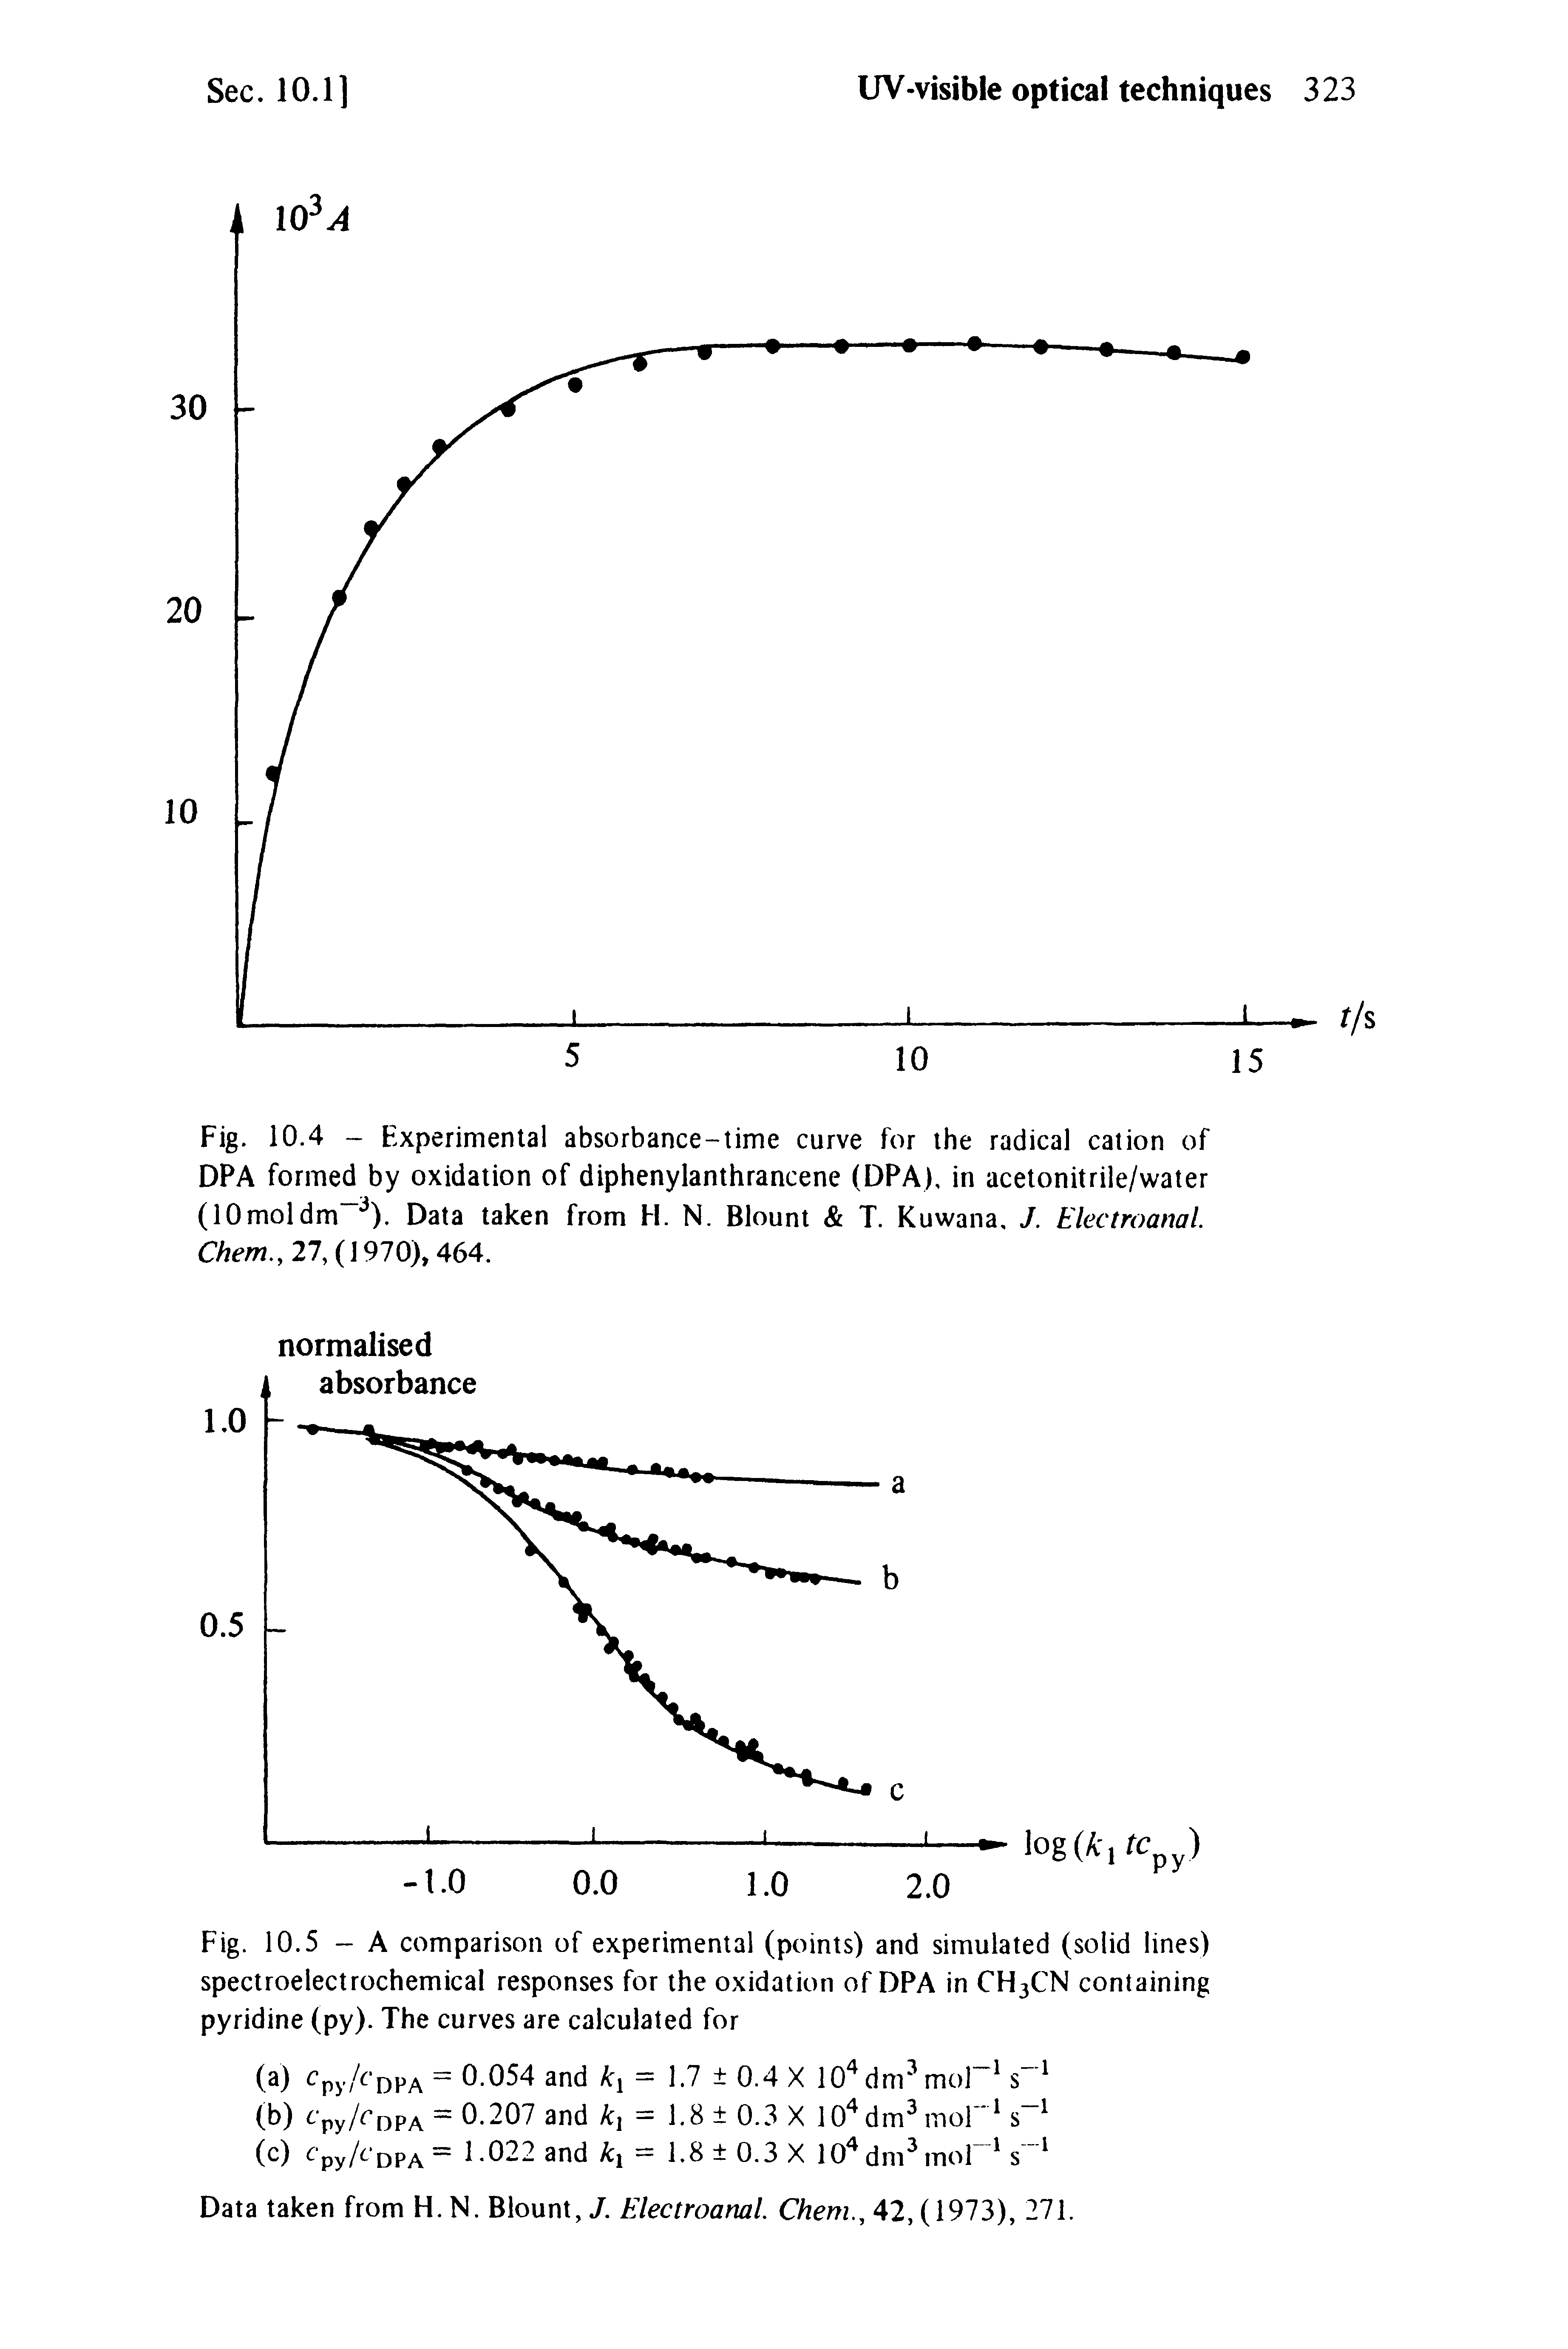 Fig. 10.4 - Experimental absorbance-time curve for the radical cation of DPA formed by oxidation of diphenylanthrancene (DPA), in acetonitrile/water (10moldm ). Data taken from H. N. Blount T. Kuwana, J. Electroanal. Chem., 27, (1970), 464.